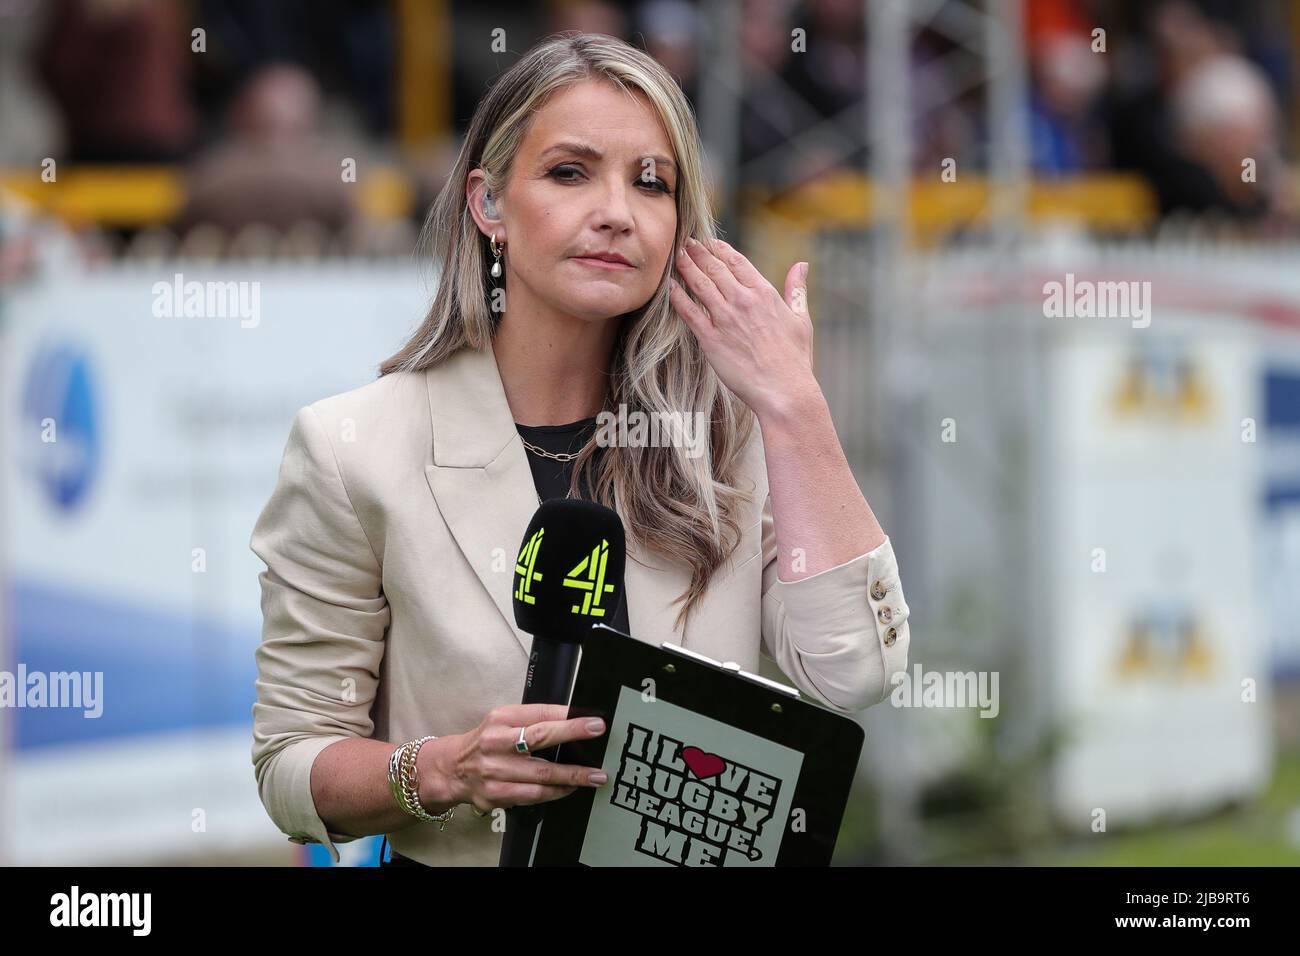 Television presenter Helen Skelton covering todays game for Channel 4 Stock Photo